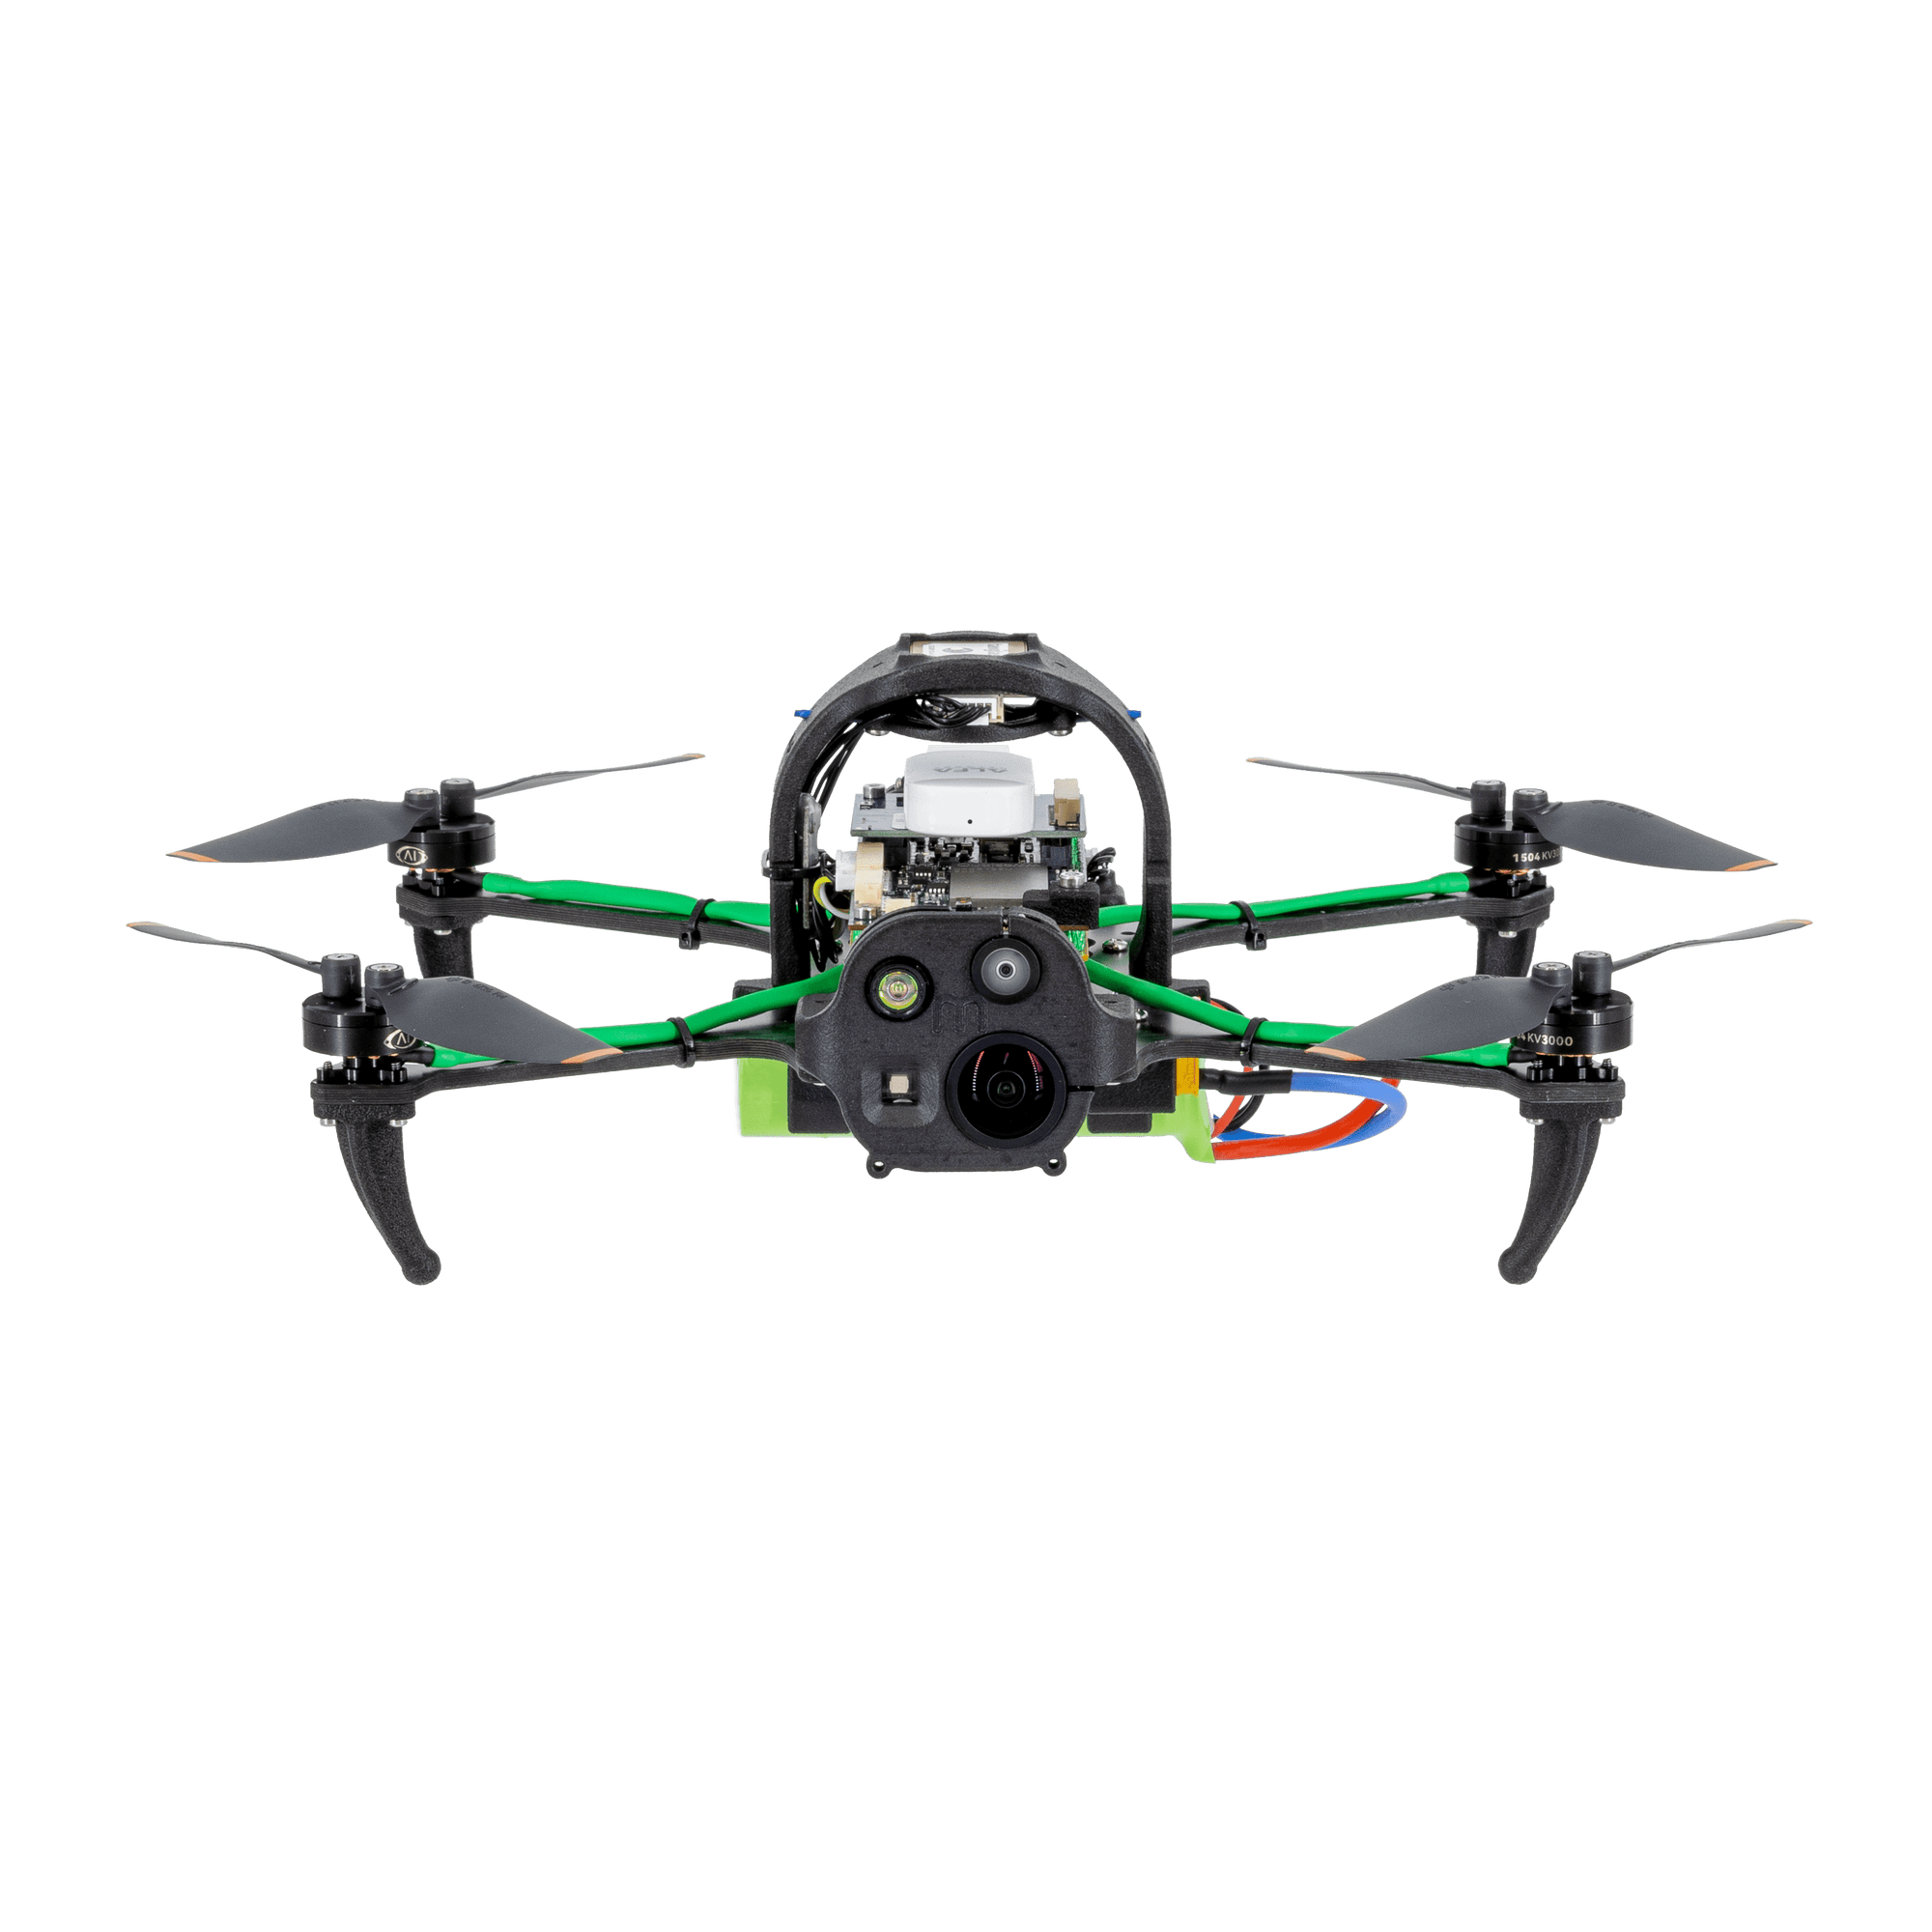 ModalAI, Inc. Drone Drone Only / 4k+TOF+Tracking (C6) / WiFi and ELRS 915MHz Starling 2 Indoor SLAM Development Drone